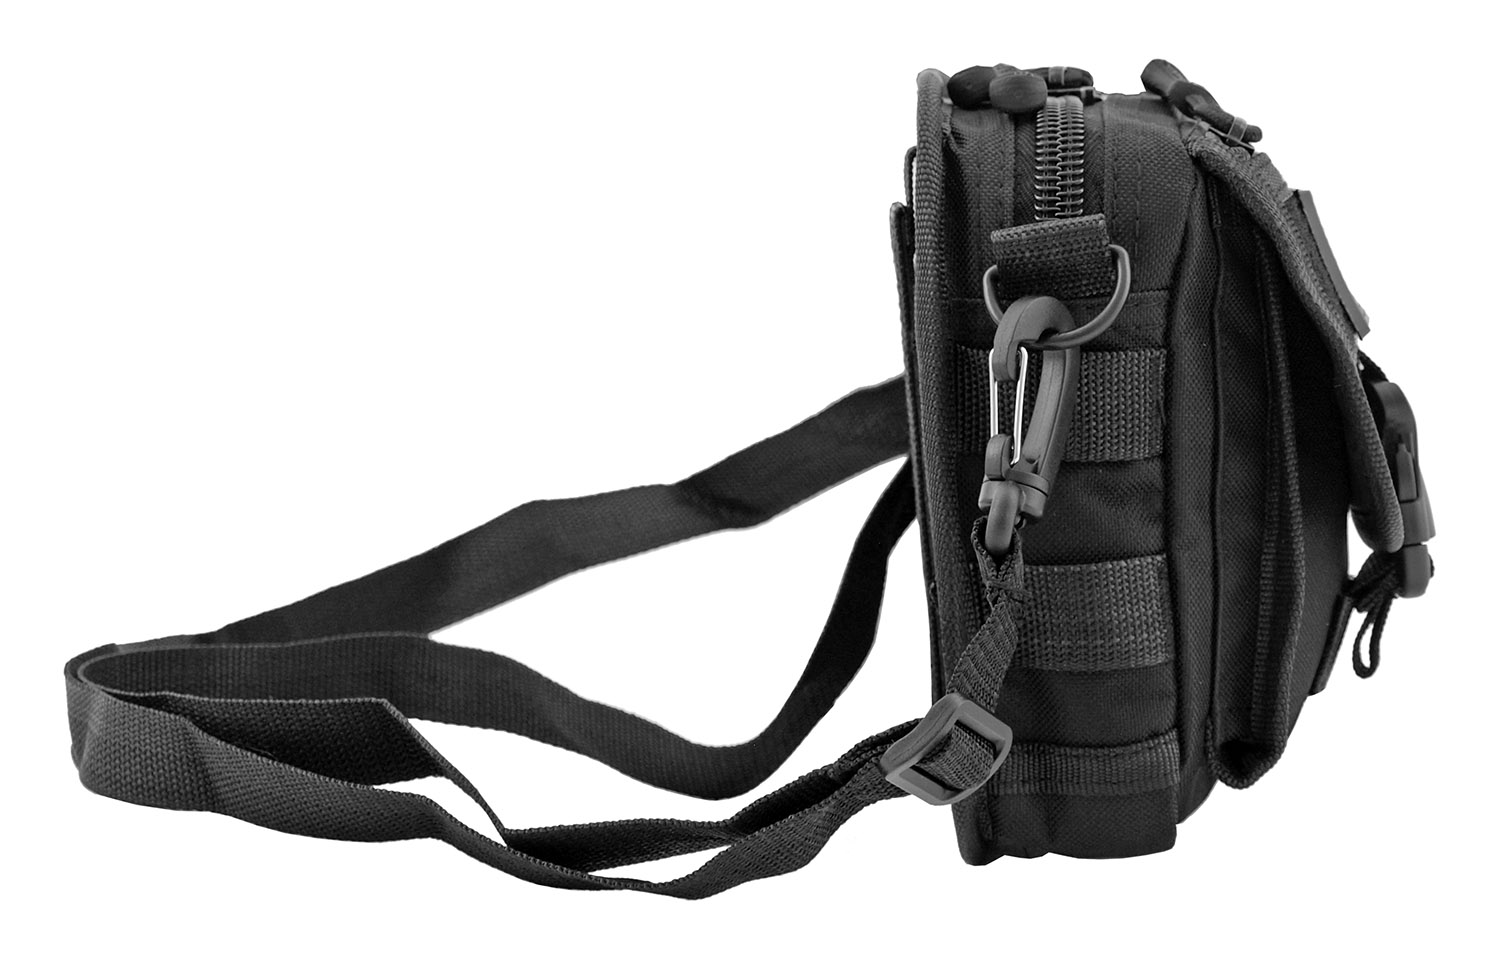 The Tactical Over the Shoulder Everyday Carry Attachment Bag - Black